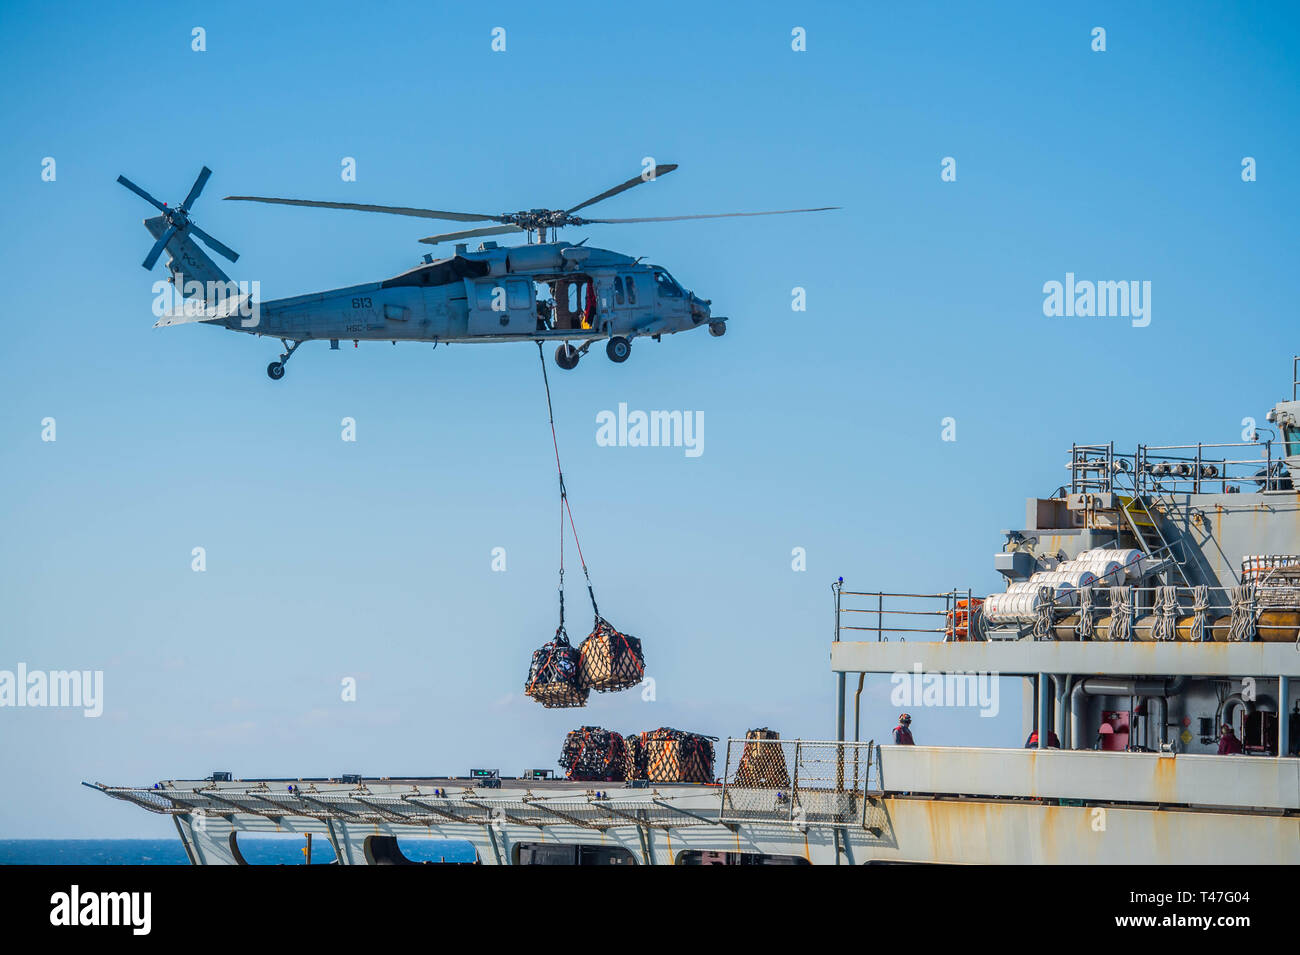 190412-N-DS741-0314 ATLANTIC OCEAN (April 12, 2019) An MH-60S Sea Hawk helicopter from the “Nightdippers” of Helicopter Sea Combat Squadron (HSC) 5, assigned to the Nimitz-class aircraft carrier USS Abraham Lincoln (CVN 72), conducts a vertical replenishment with the fast combat support ship USNS Arctic (T-AOE-8). Abraham Lincoln is underway as part of the Abraham Lincoln Carrier Strike Group (ABECSG) deployment in support of maritime security cooperation efforts in the U.S. 5th, 6th and 7th Fleet areas of responsibility. With Abraham Lincoln as the flagship, deployed strike group assets inclu Stock Photo